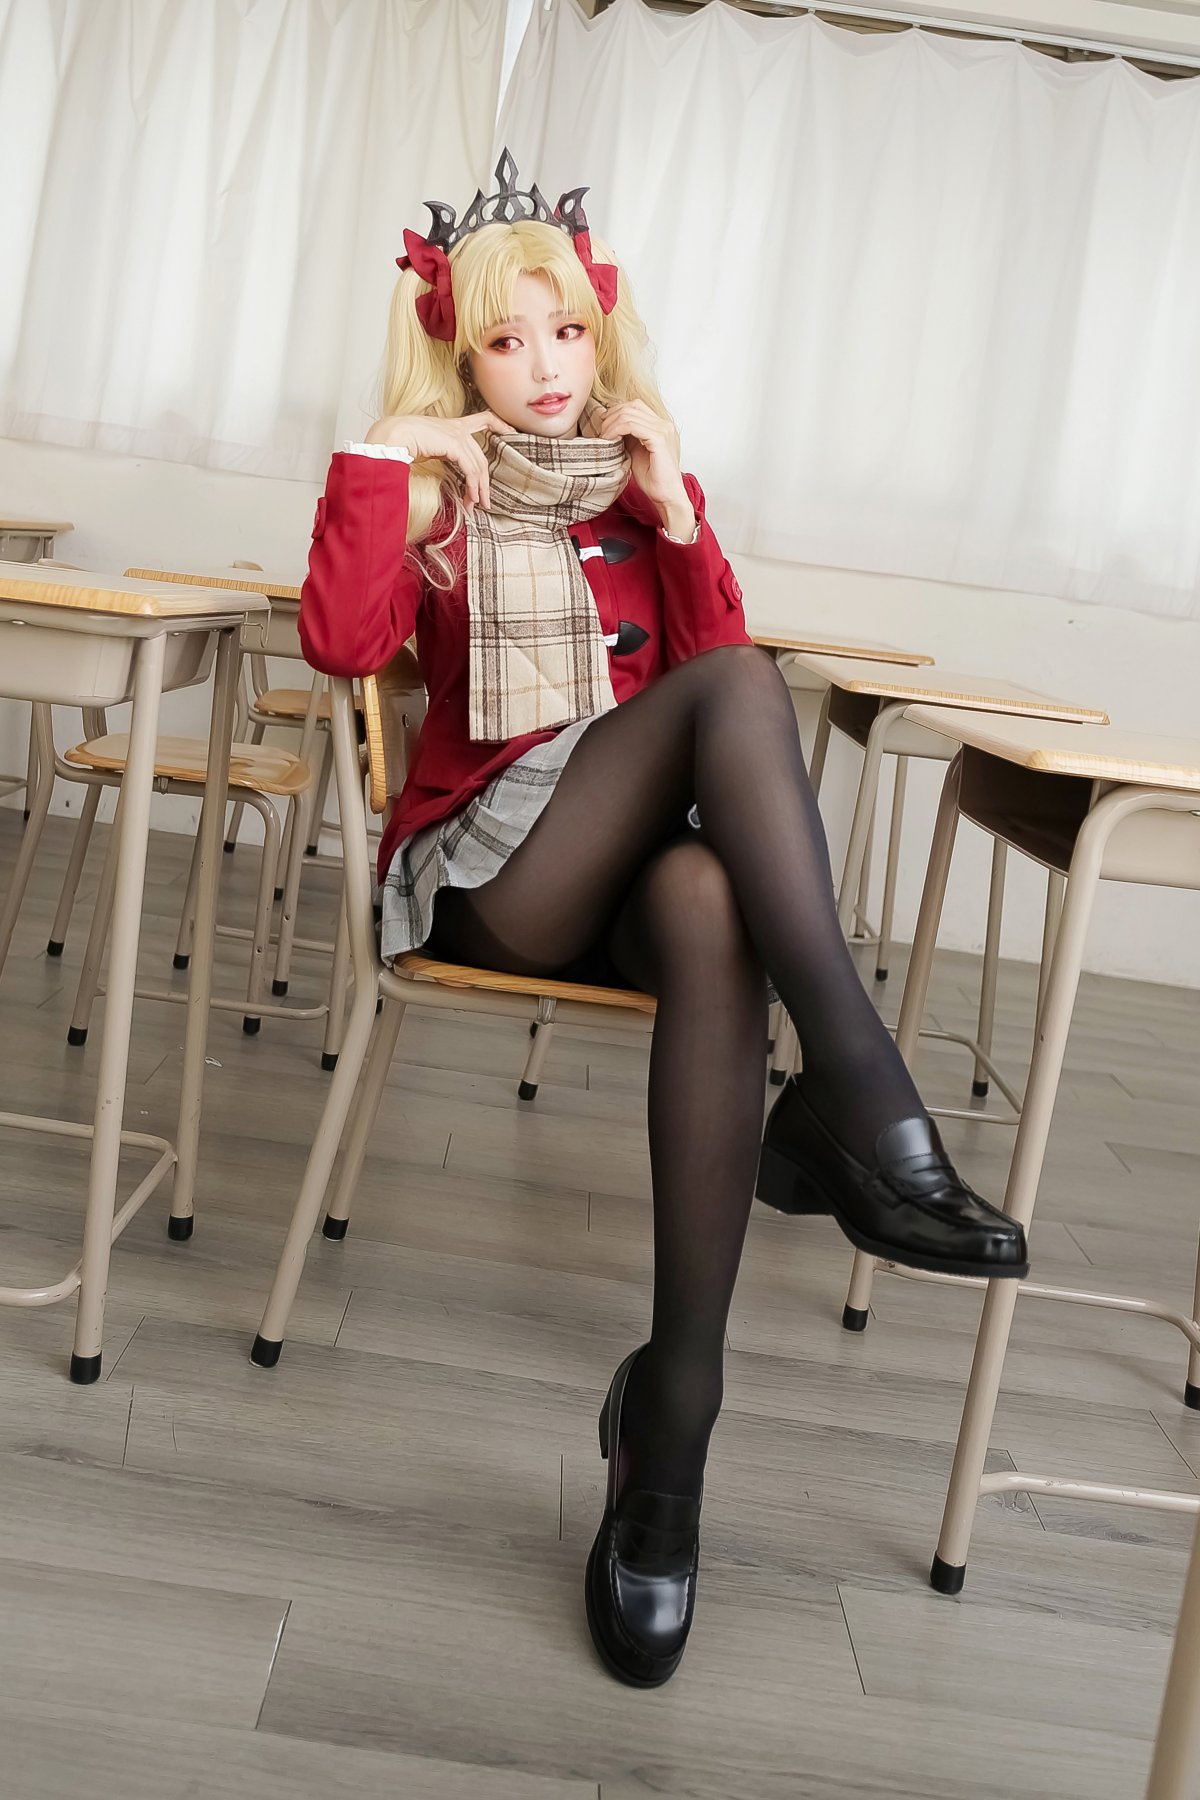 Coser@Ely Vol.022 ERE エレシュキガル 写真 A 0030